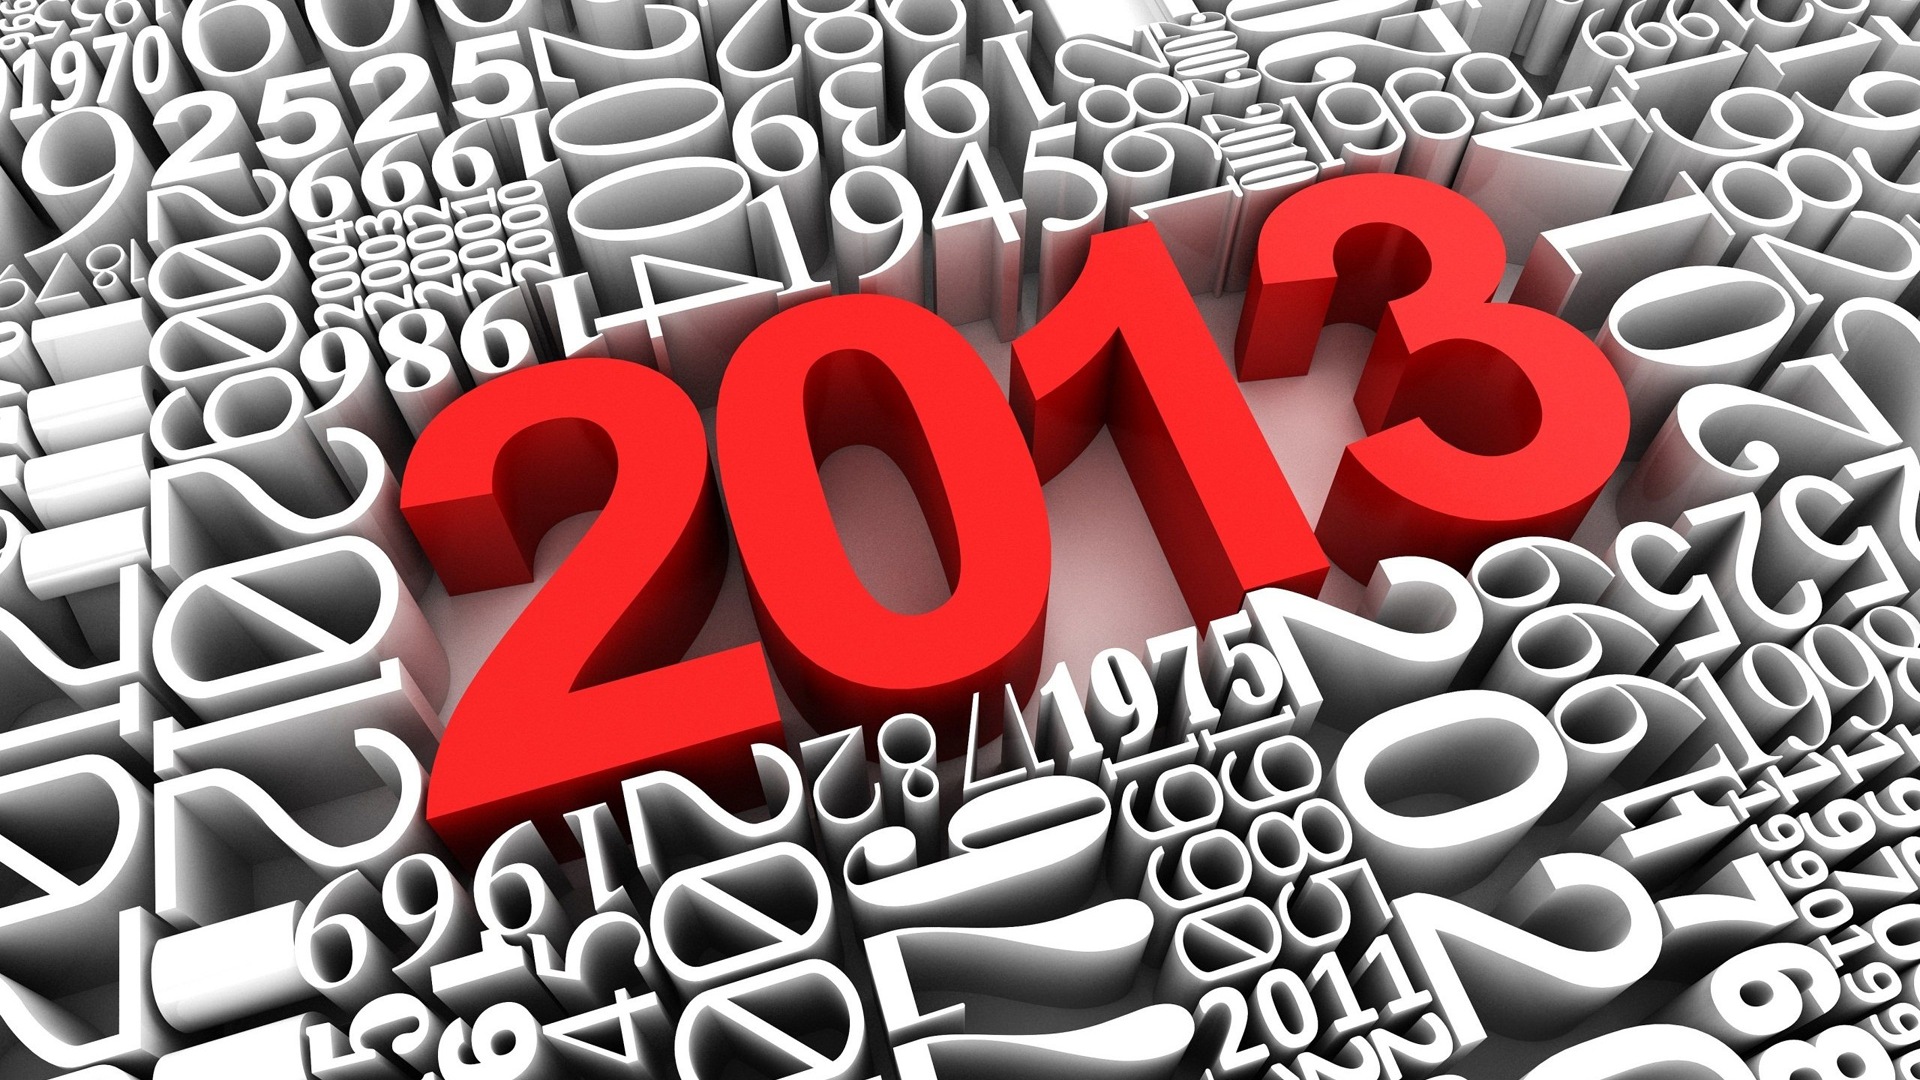 2013 Happy New Year HD wallpapers #7 - 1920x1080